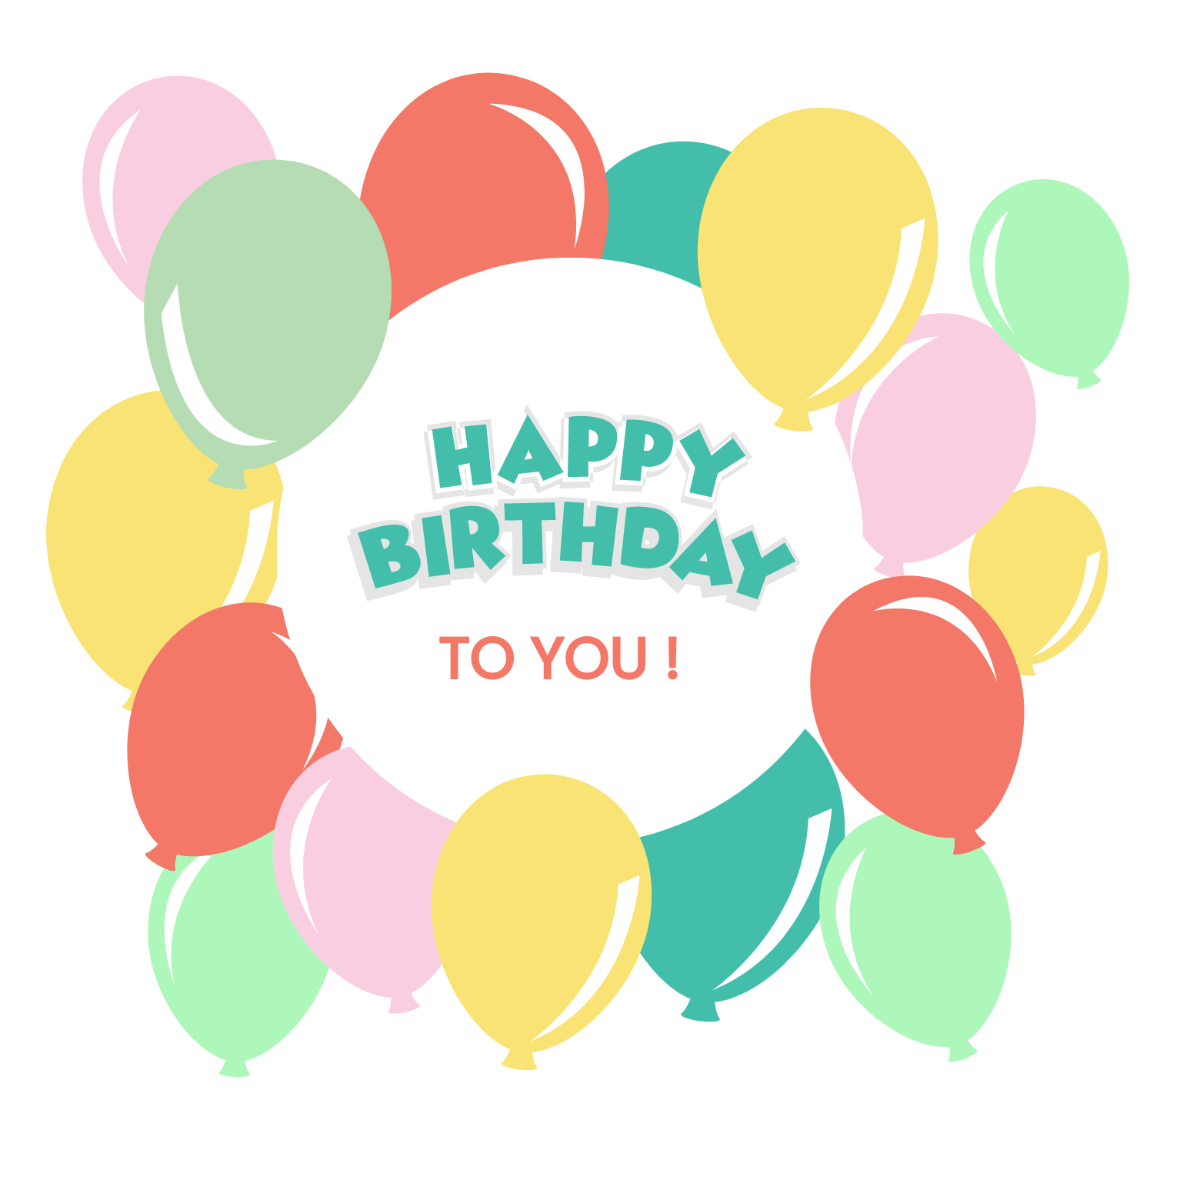 Happy Birthday Greeting Card Vector Template